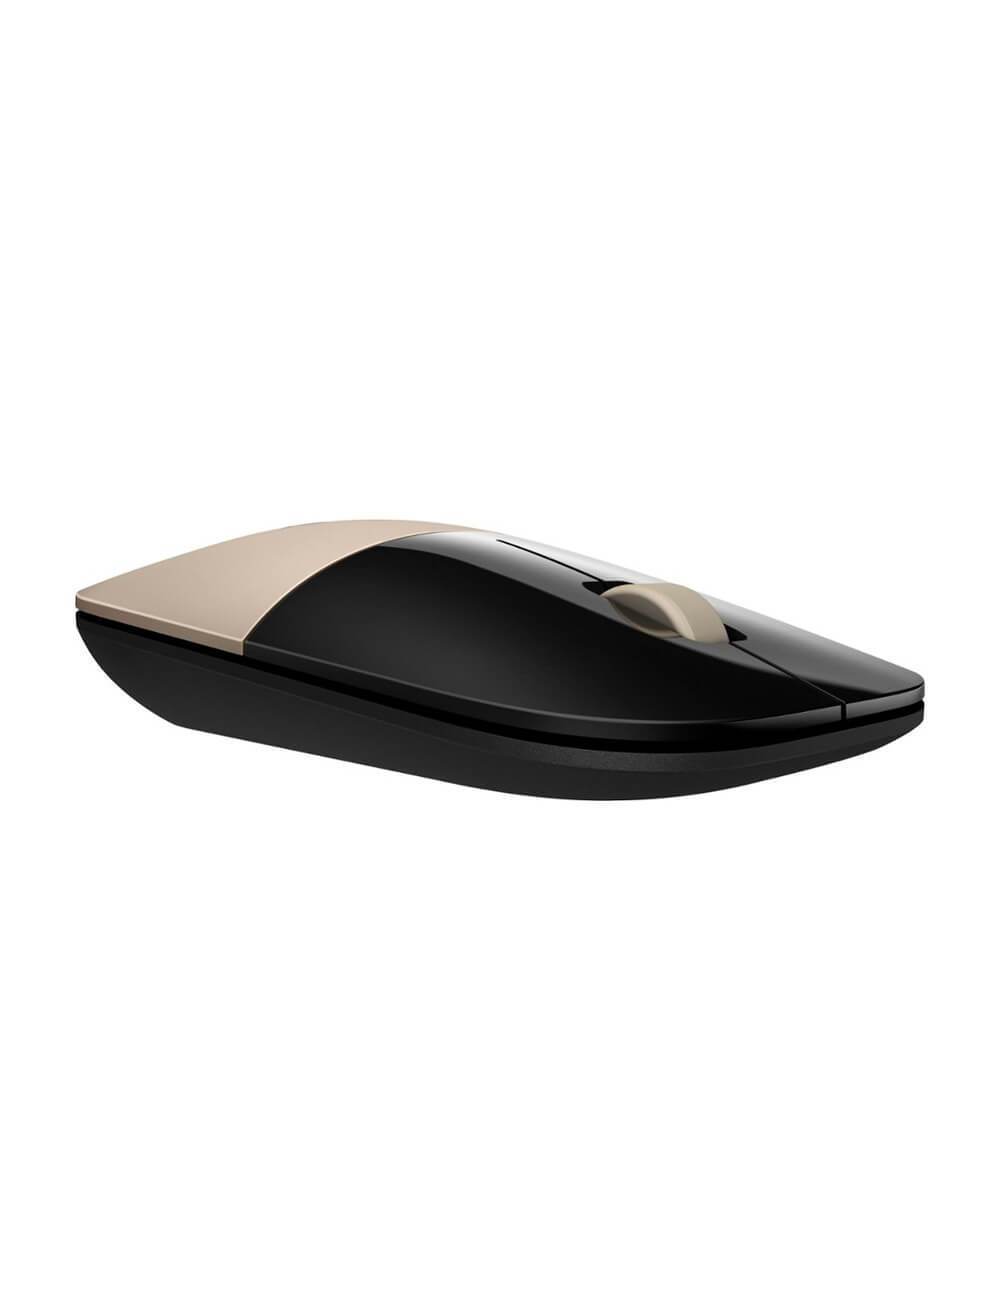 Dual Mode Mouse 2.4Ghz Wireless Plus